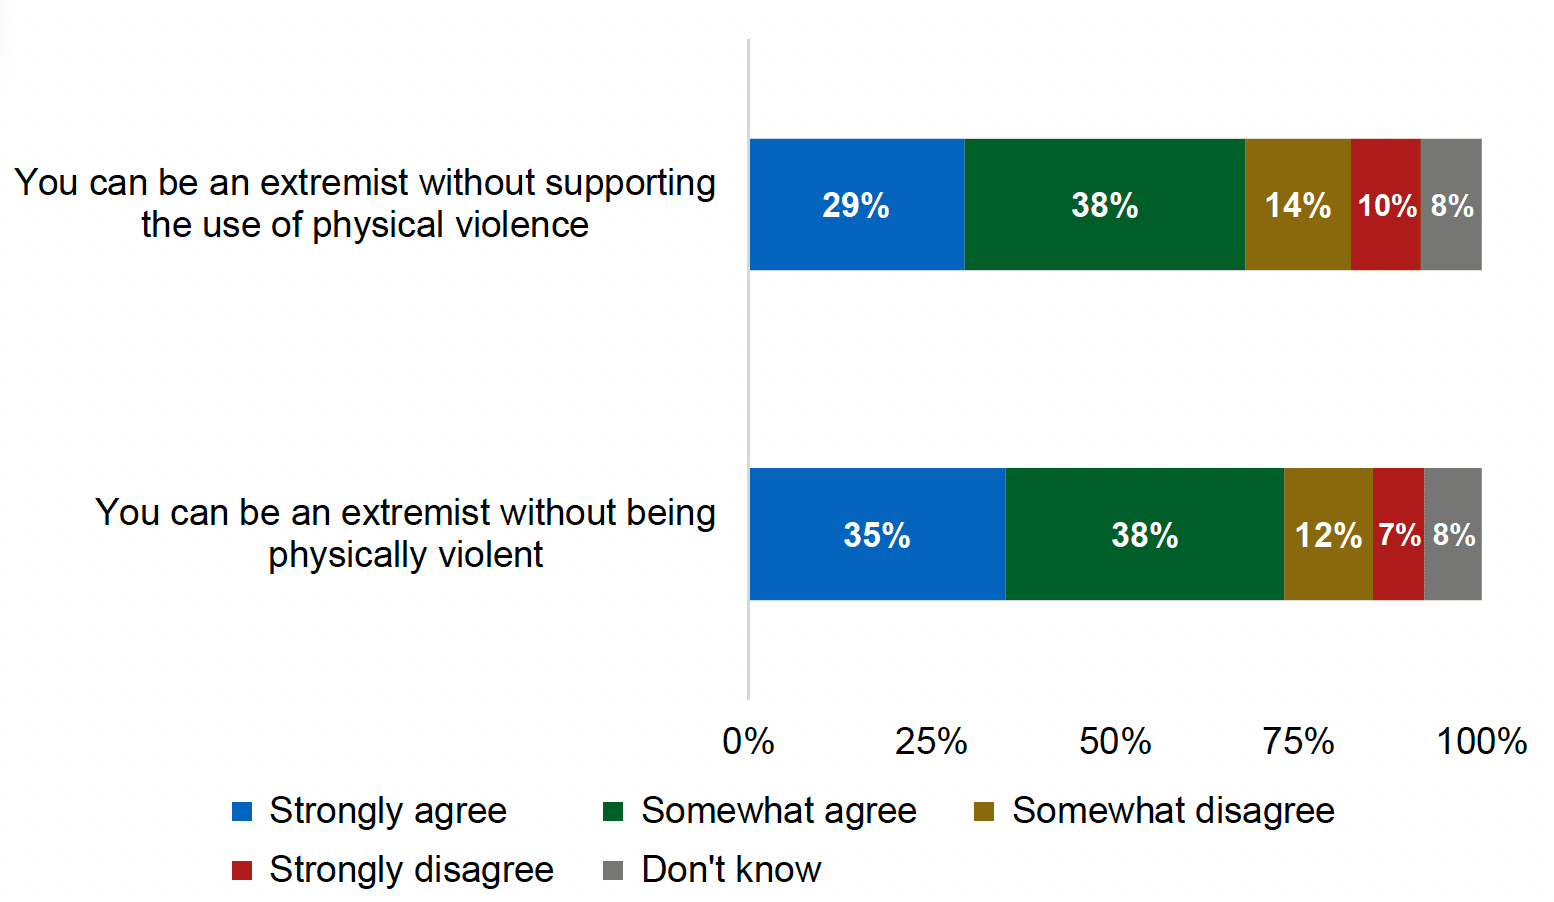 A stacked bar chart showing the differences in opinion related to the statements “you can be an extremist without supporting the use of violence” and “you can be an extremist without being physically violent”. The results are discussed in the main body of the text.